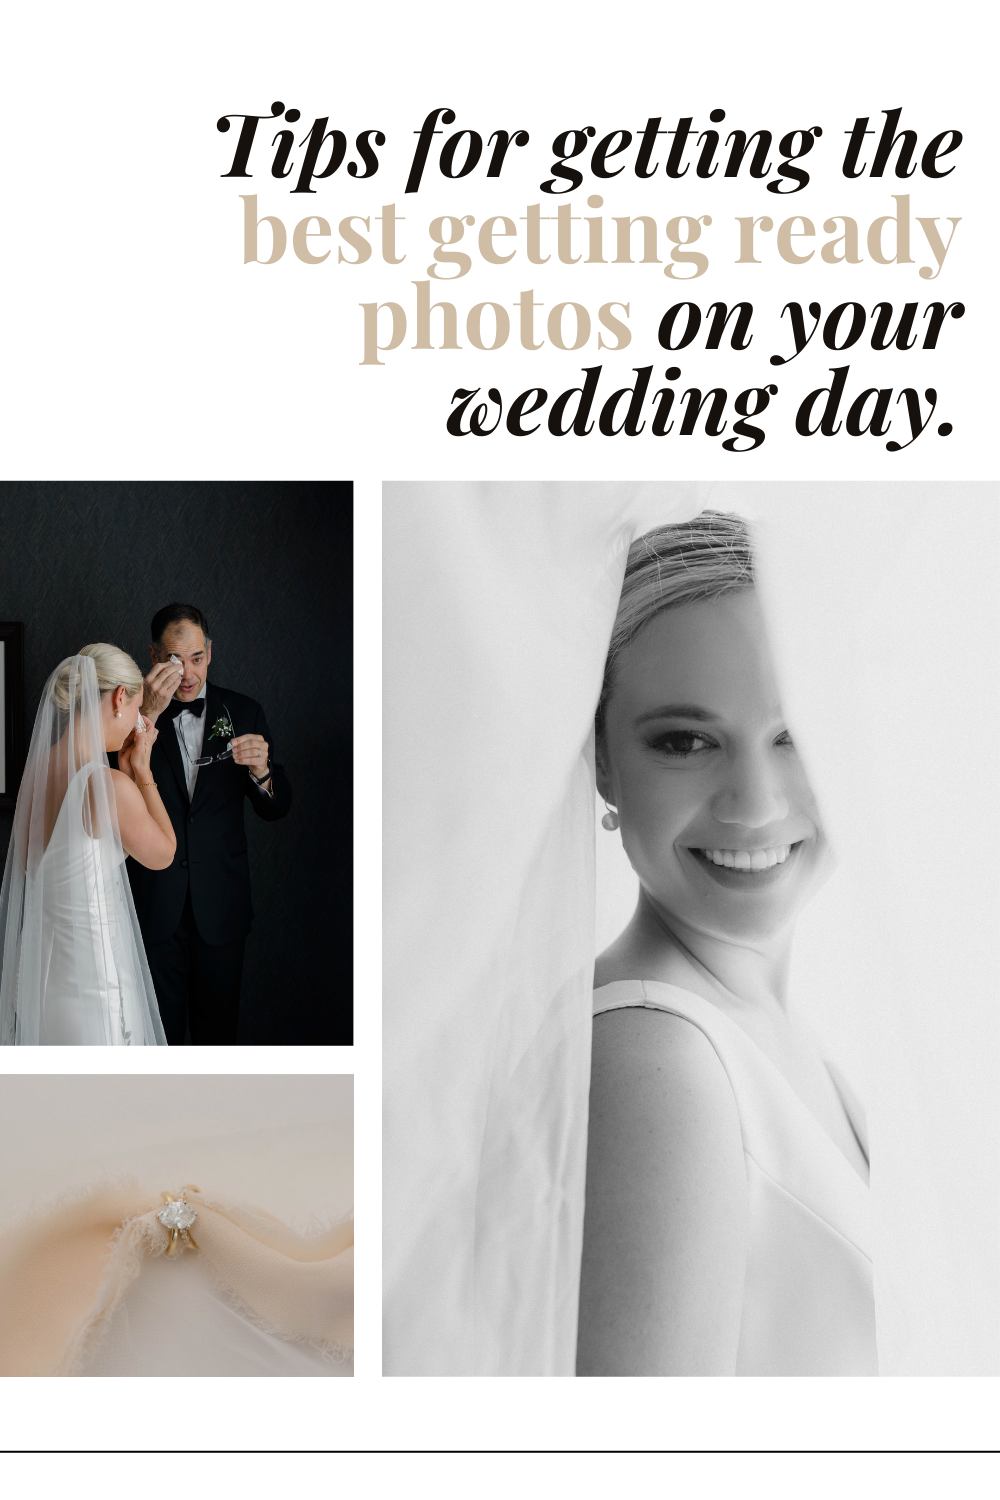 Tips for stunning wedding getting ready photos.